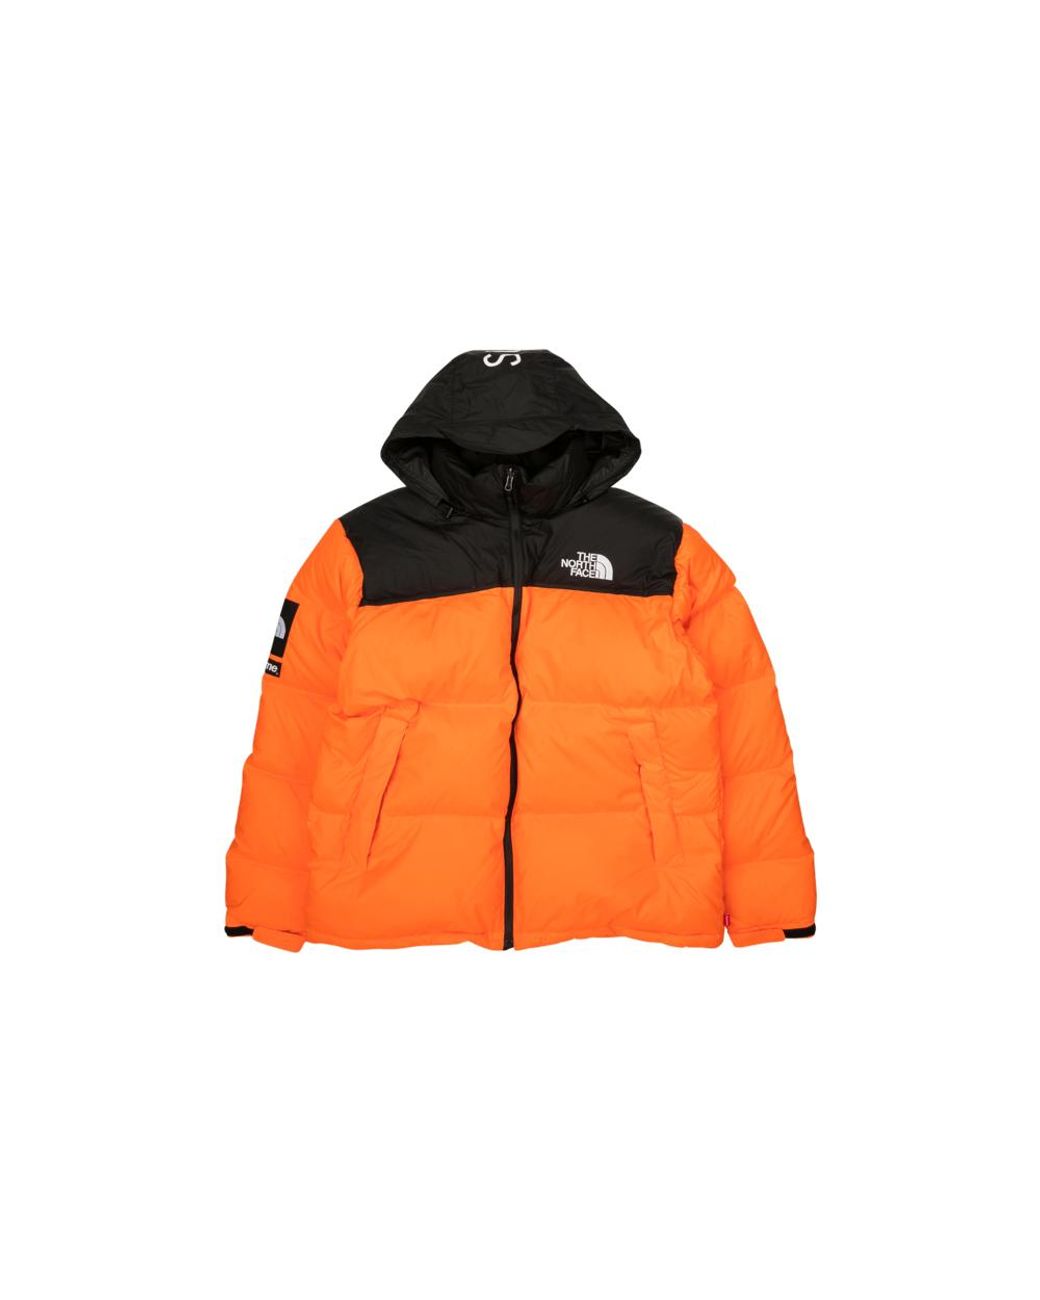 the north face puffer jacket orange